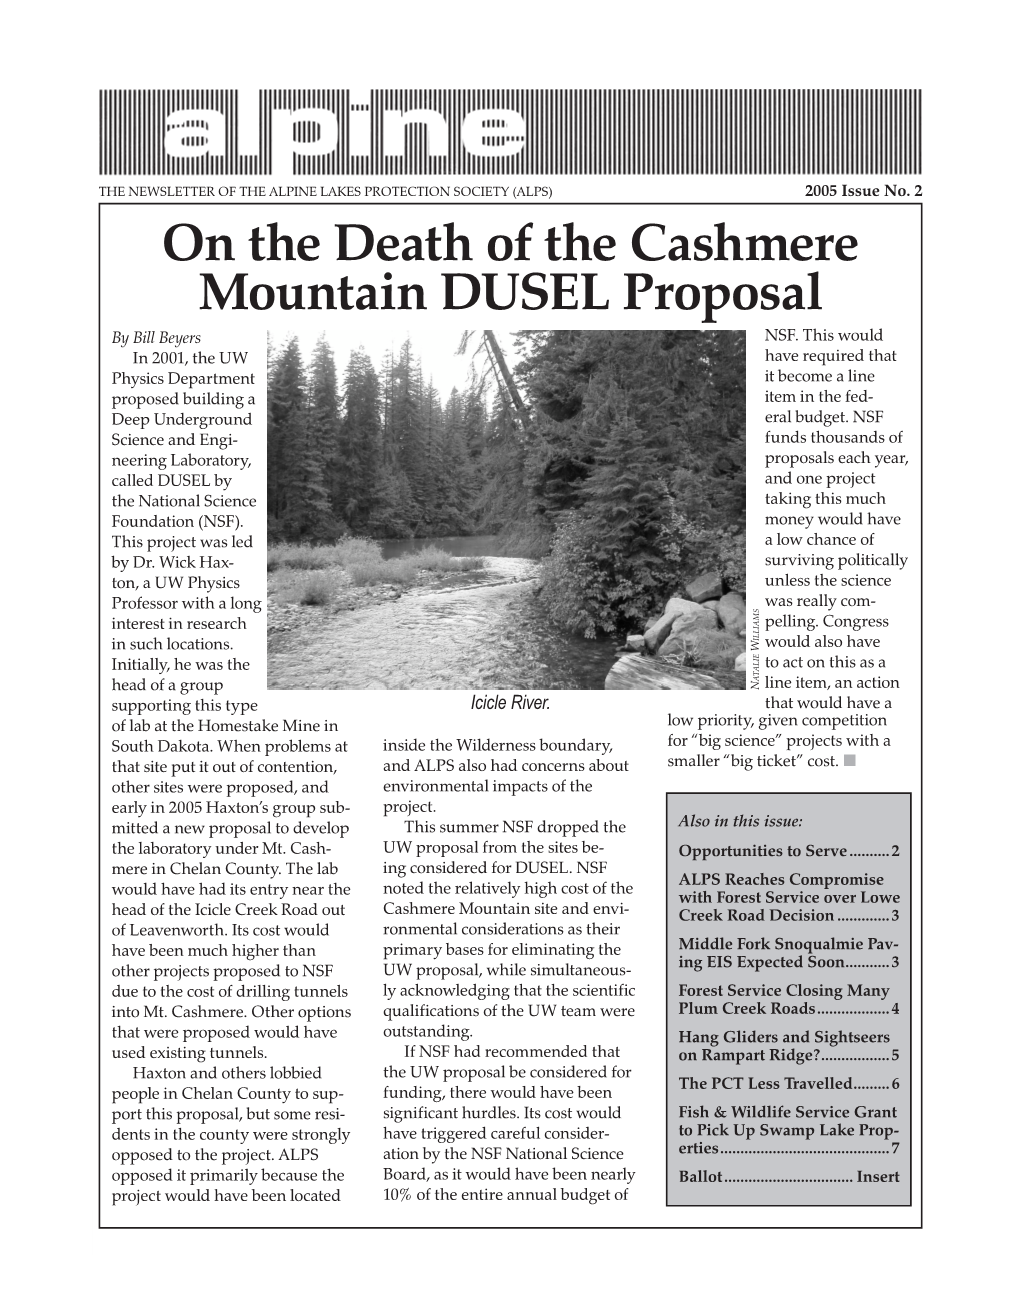 On the Death of the Cashmere Mountain DUSEL Proposal by Bill Beyers NSF